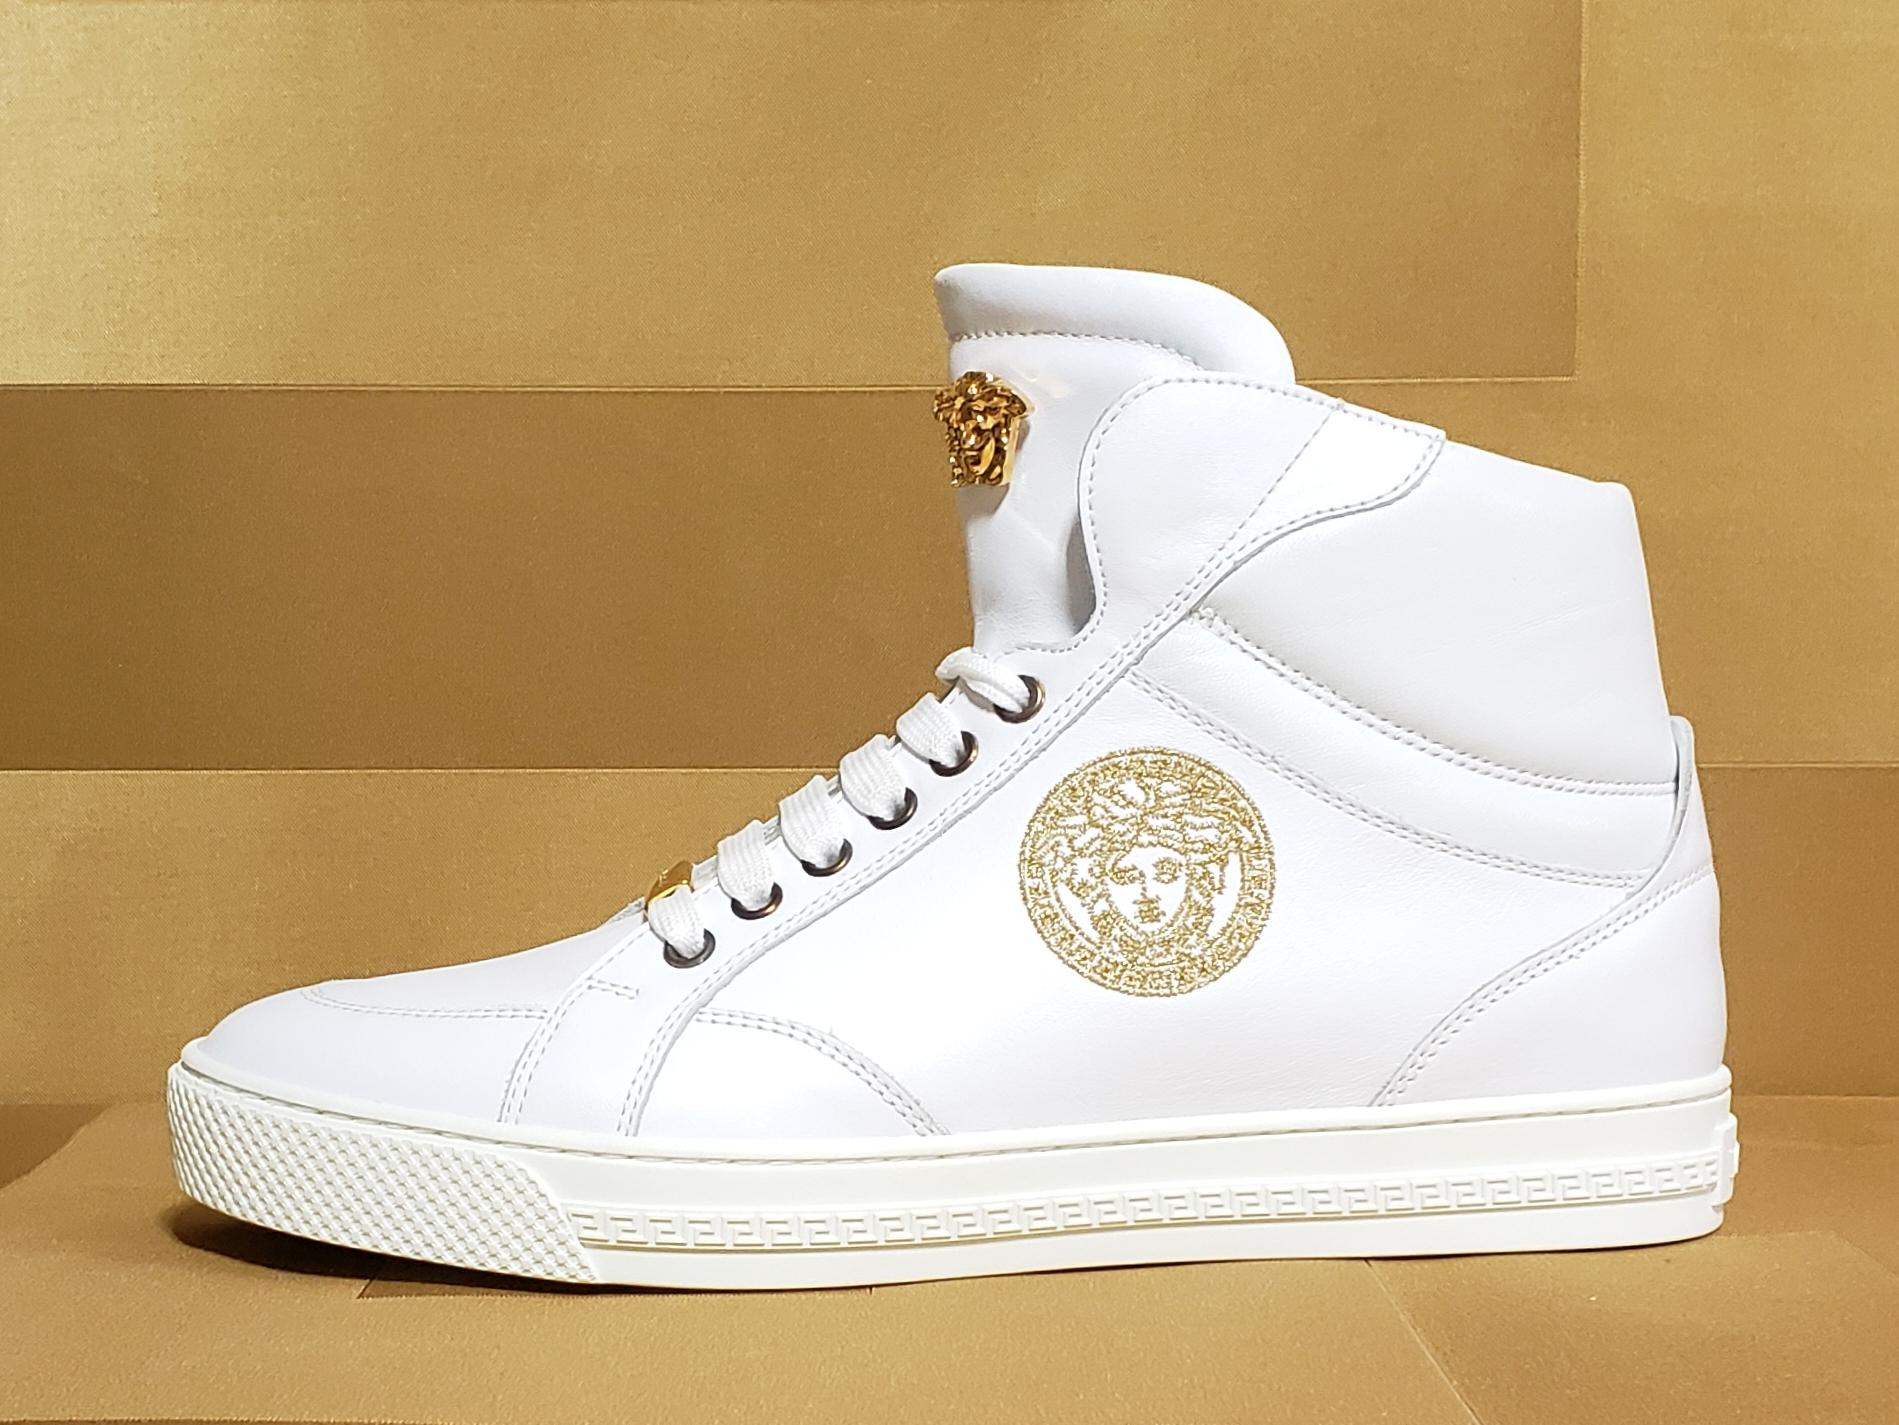 Gray NEW VERSACE WHITE LEATHER SNEAKERS w/EMBROIDERED GOLD MEDUSA 39.5 - 6.5